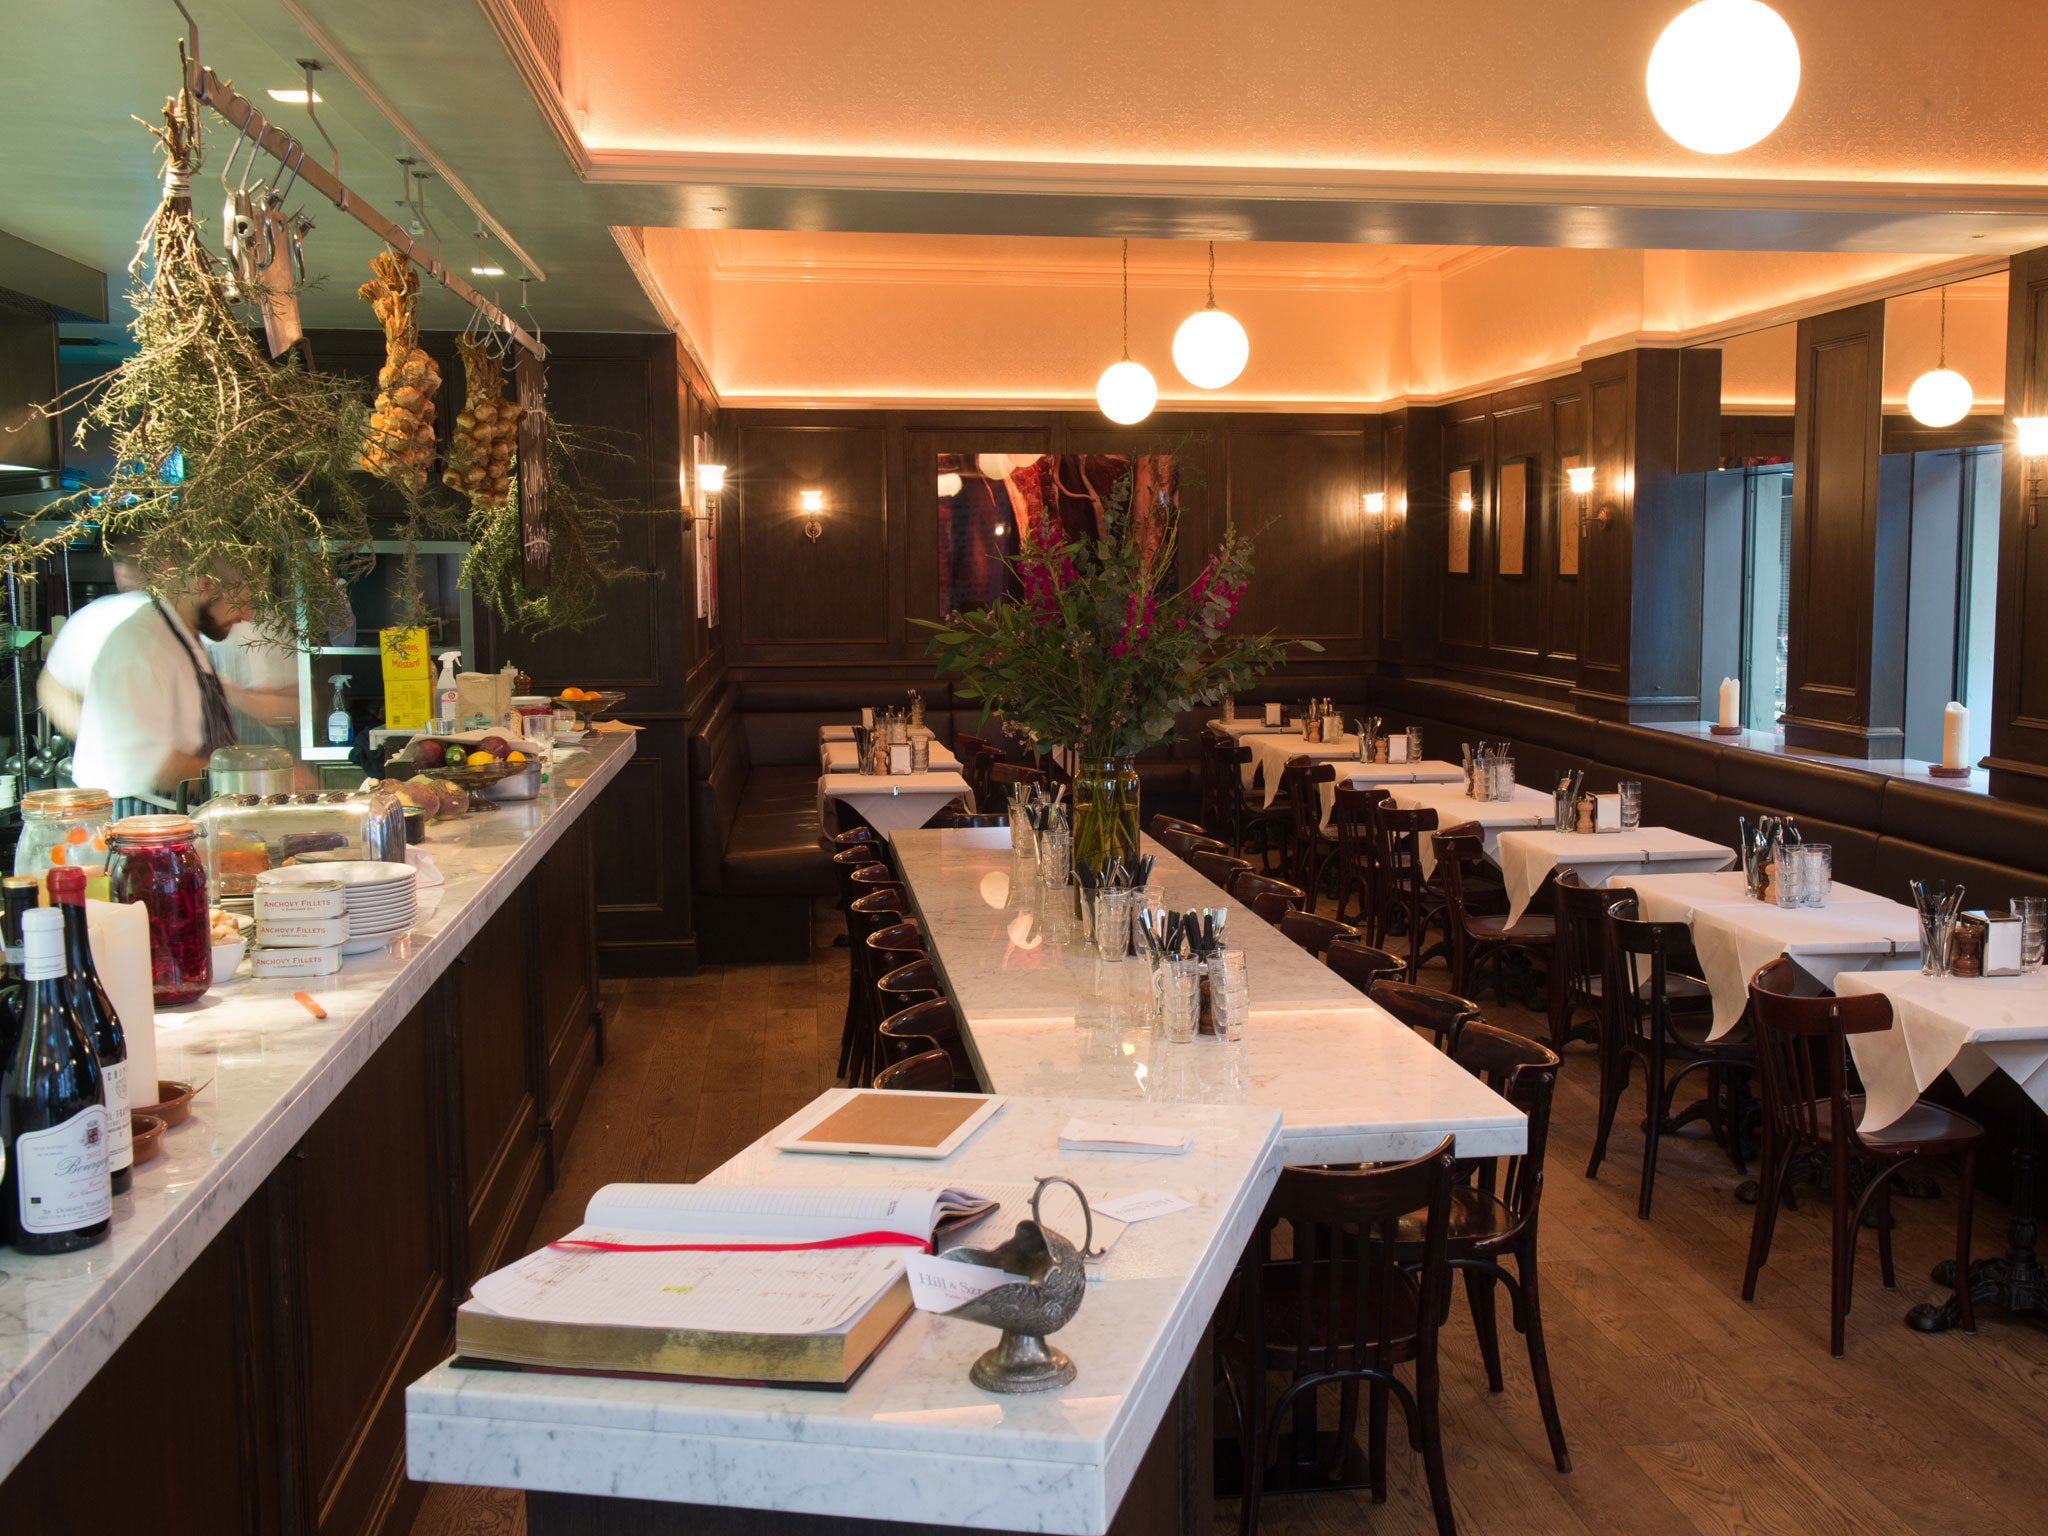 The restaurant has the feel of a traditional City dining room temporarily occupied by YBAs